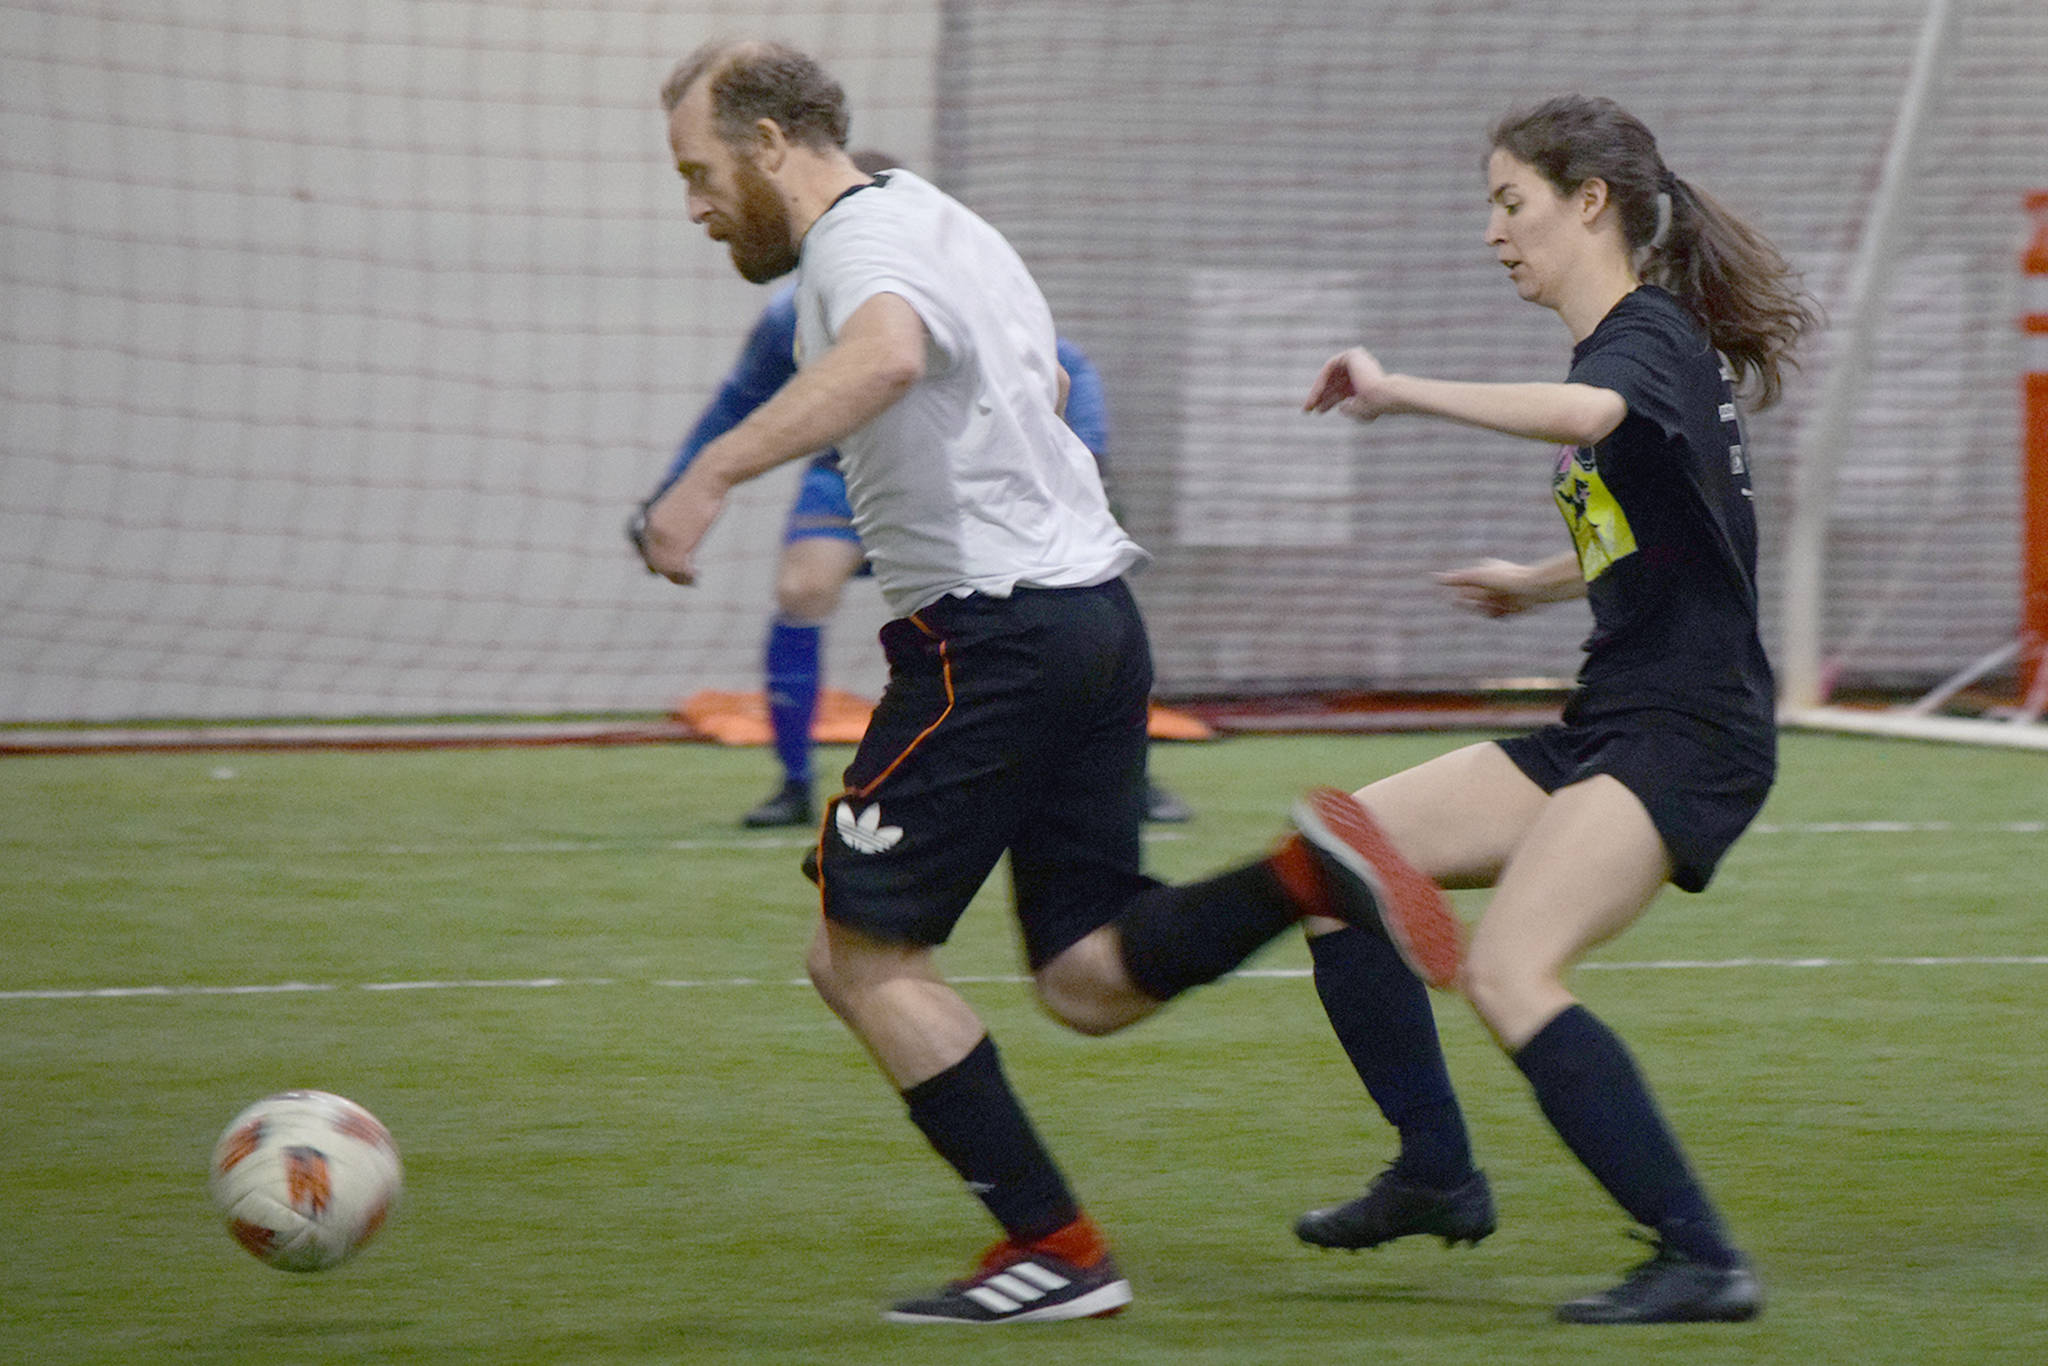 Some Stars’ Pat Race, left, dribbles the ball in front of Goal Patrol’s Elisha Thibodeau during the championship game of the Masters Division of the Holiday Cup at the Dimond Park Field House on Tuesday, Dec. 31, 2019. Some Stars defeated Goal Patrol 5-3. (Nolin Ainsworth | Juneau Empire)